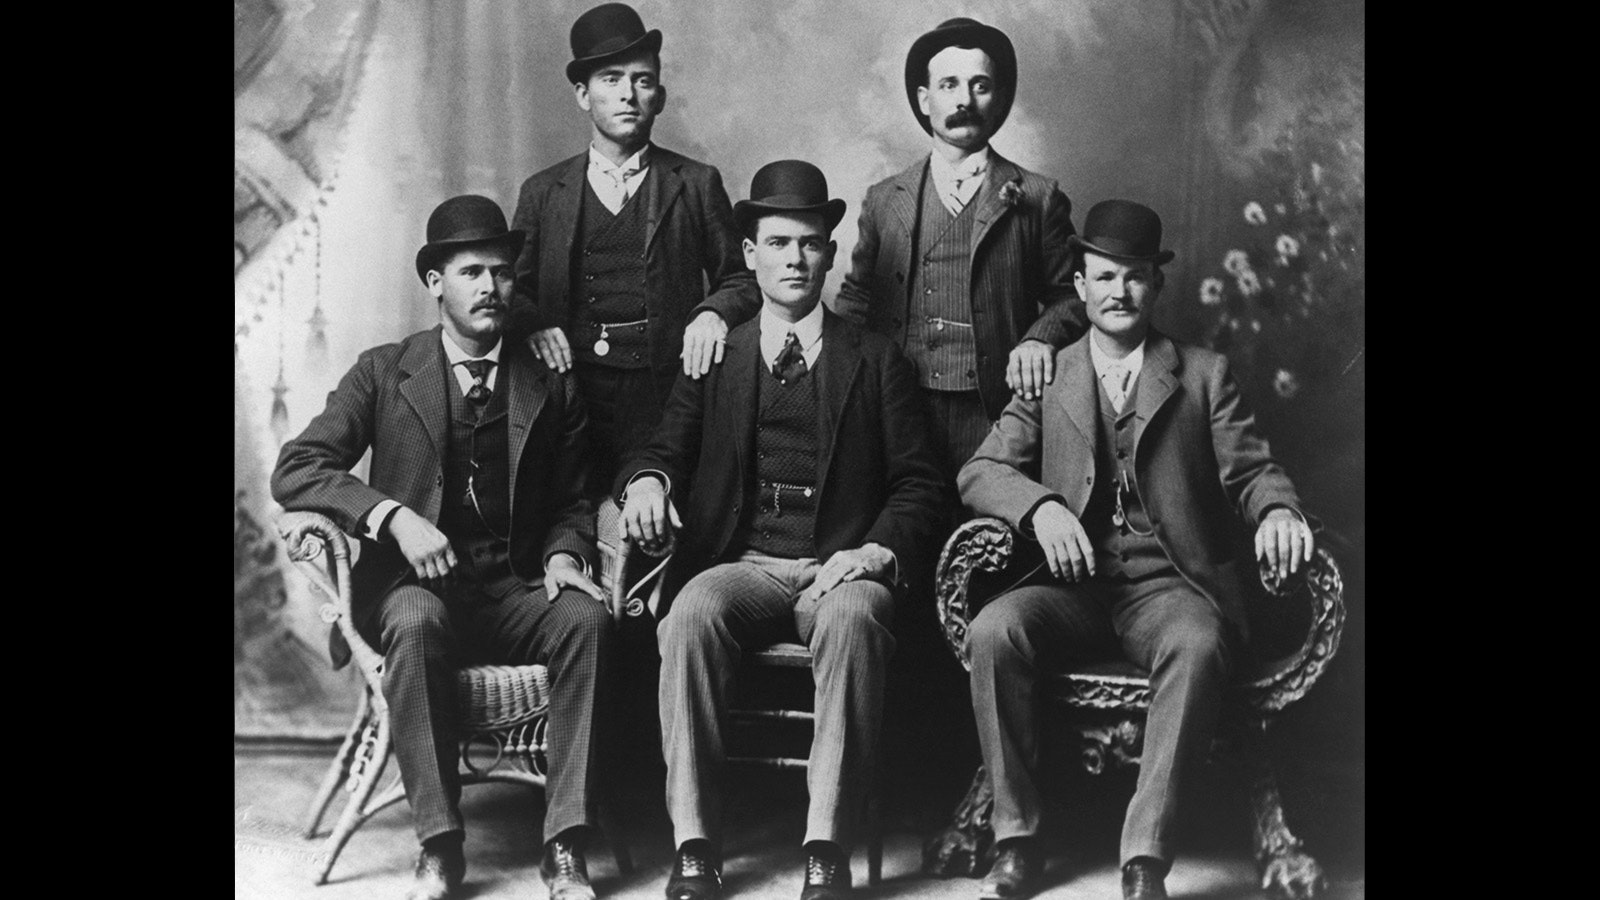 The famous "Fort Worth Five" photo of the Wild Bunch in 1901. They are, from left, William Carver (News Carver), Harvey Logan (Kid Curry); sitting, Harry Longabaugh (Sundance Kid), Ben Kilpatrick (The Tall Texan) and Robert LeRoy Parker (Butch Cassidy).